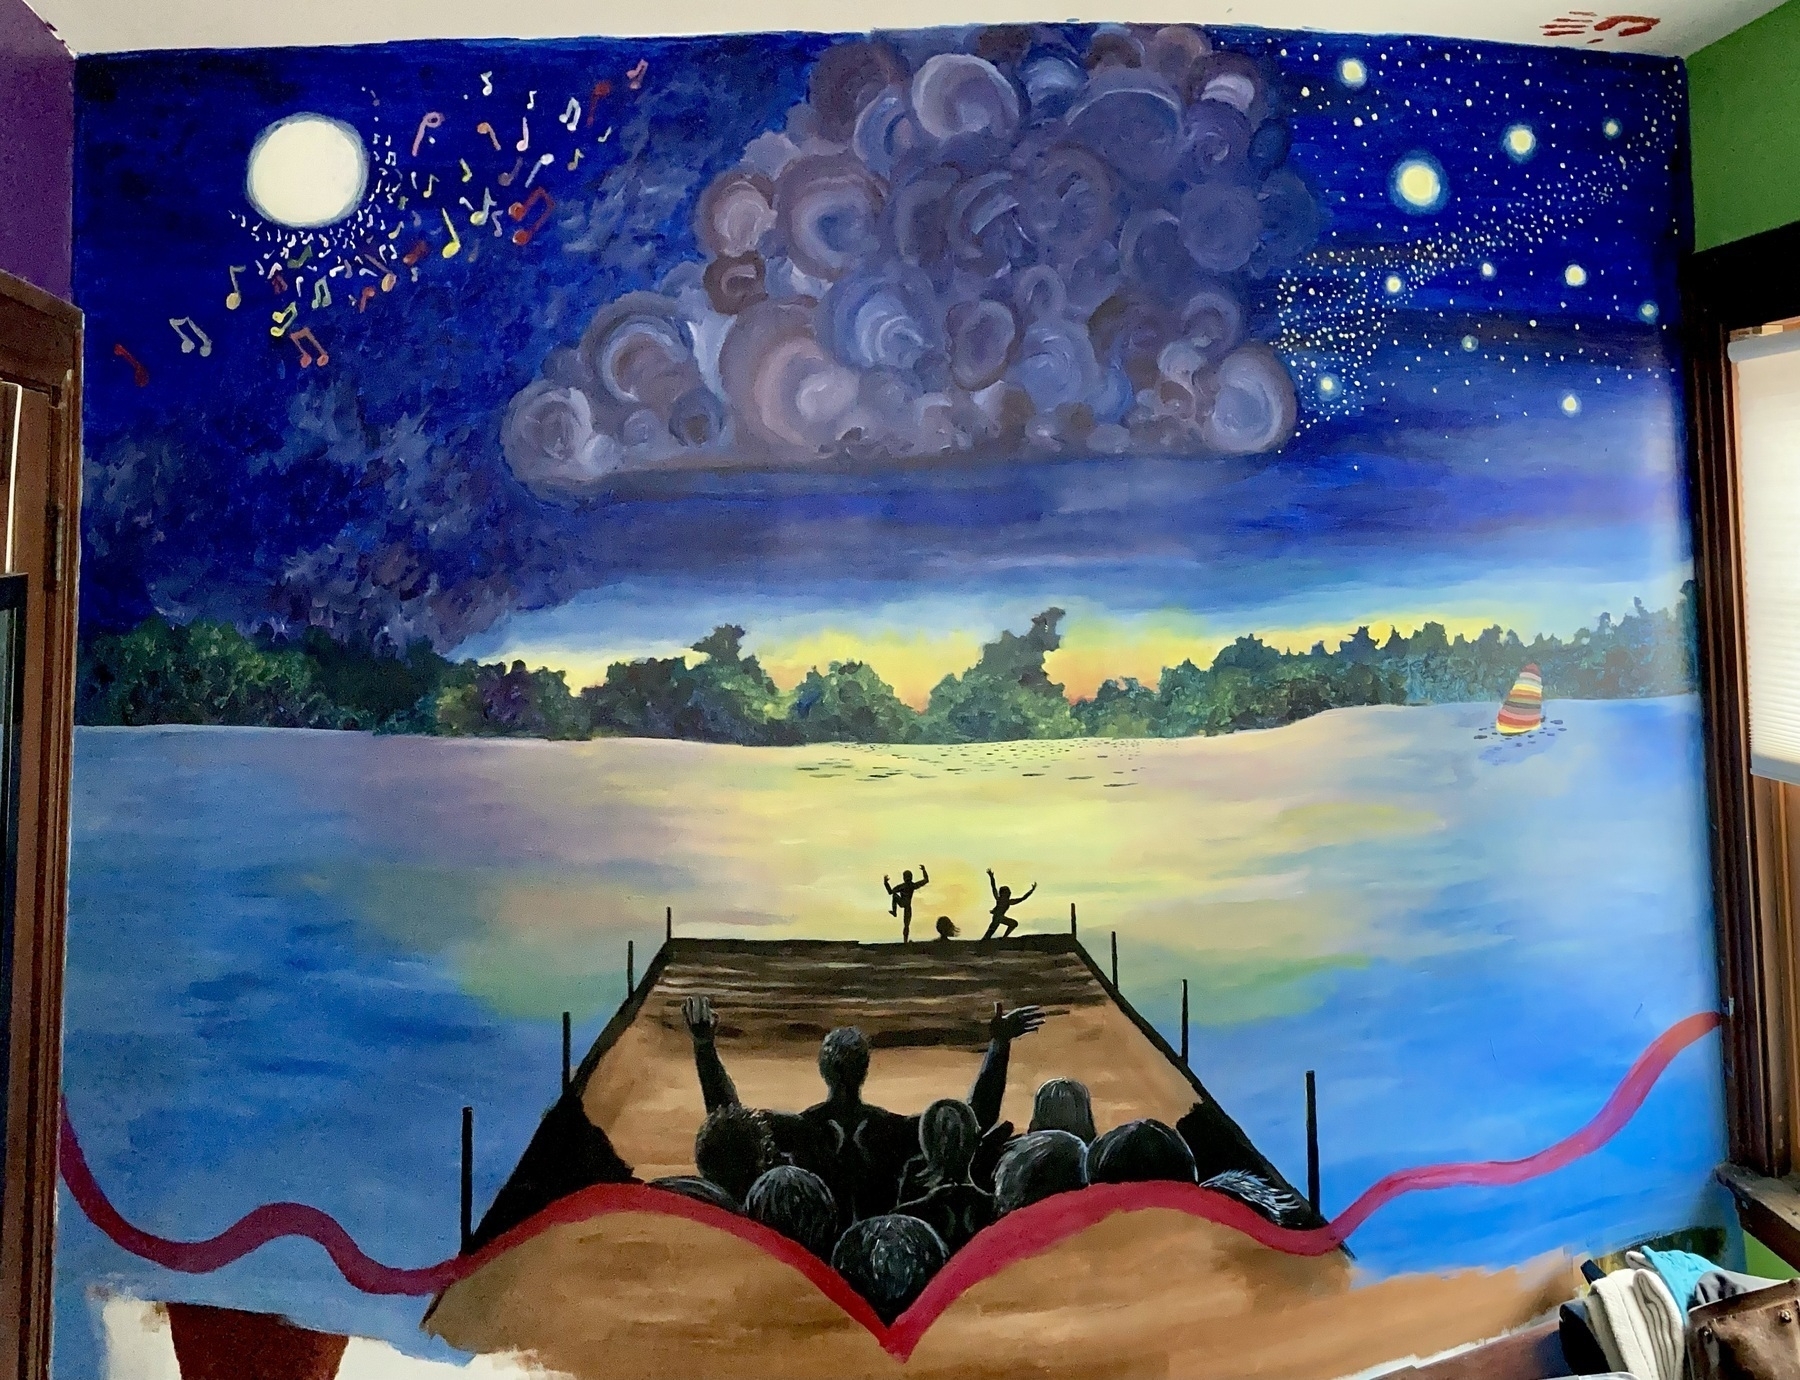 A wall is painted in bright colors depicting a sunset at a lake. Children jump off a dock while adults watch on.  A sailboat on the lake has a many-colored sail.  Clouds, stars, and the moon fill the twilight sky above.